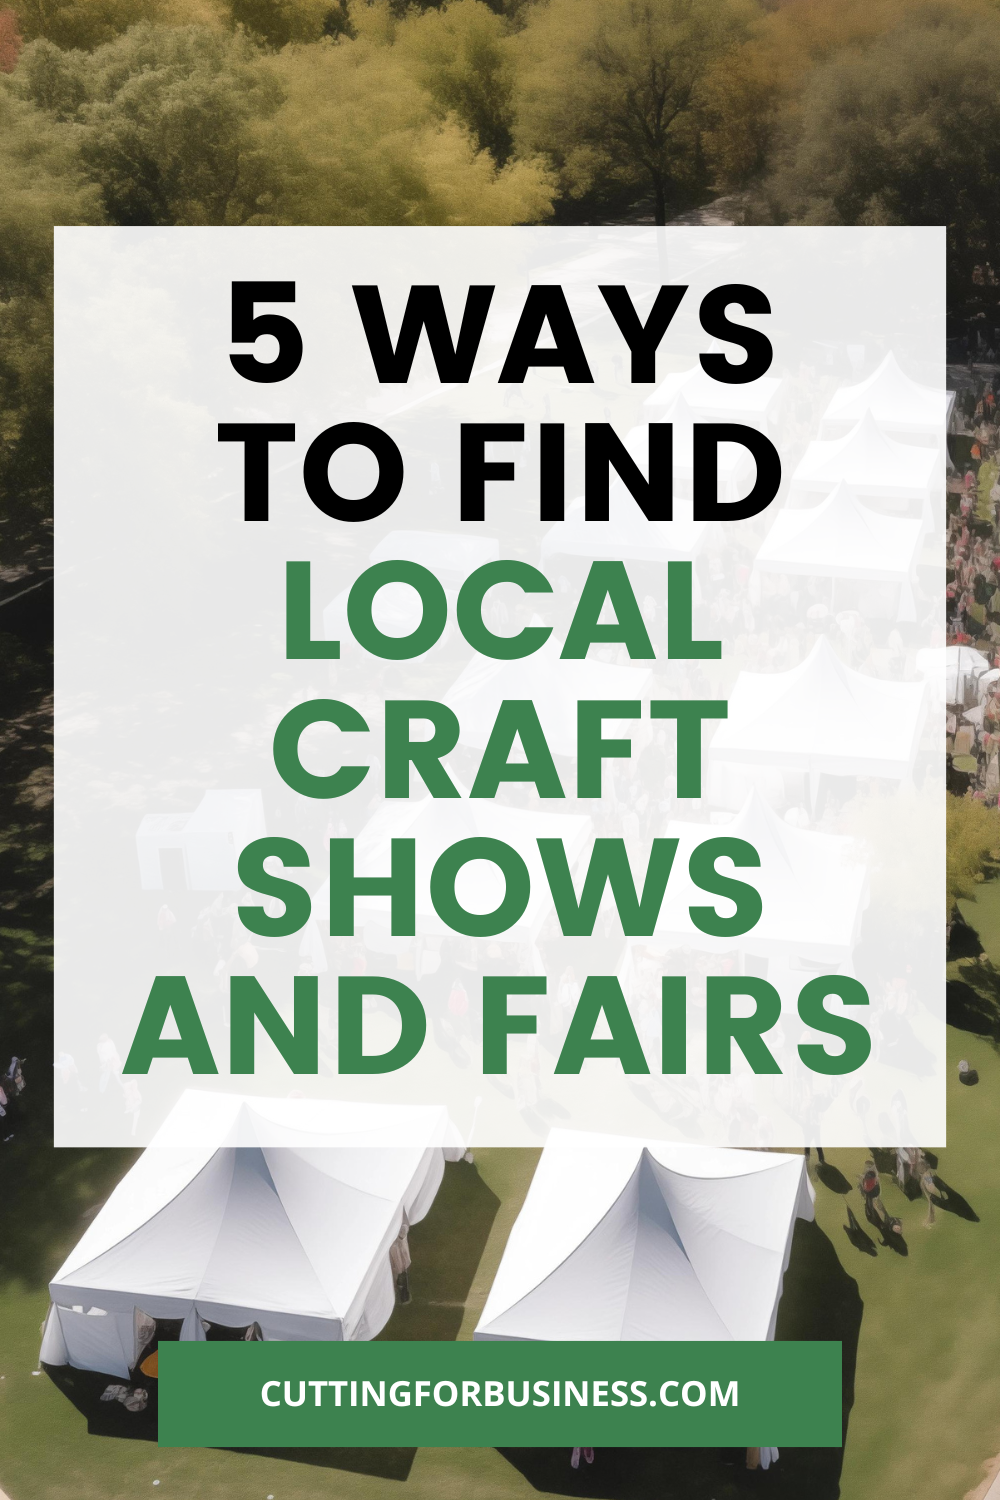 5 Ways to Find Local Craft Shows and Fairs - cuttingforbusiness.com